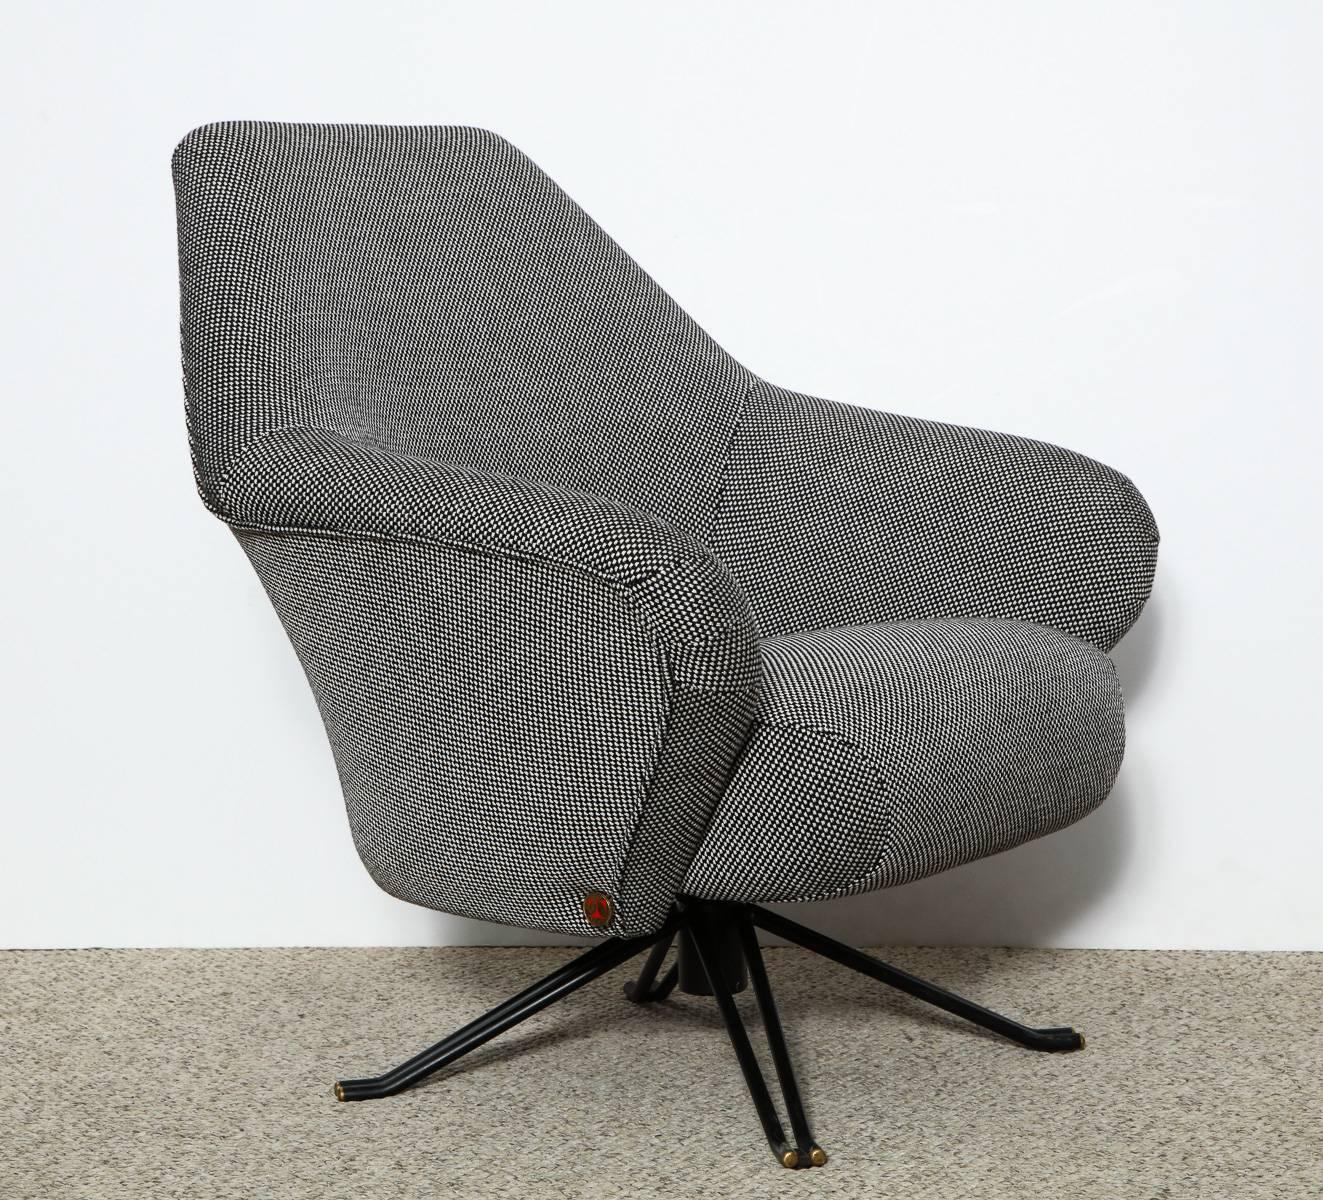 P32 lounge chair by Osvaldo Borsani for Tecno. Architectural chair with swivel base. Black painted metal legs with brass tips, and vintage Tecno fabric. Signed on base and Tecno emblems on sides.